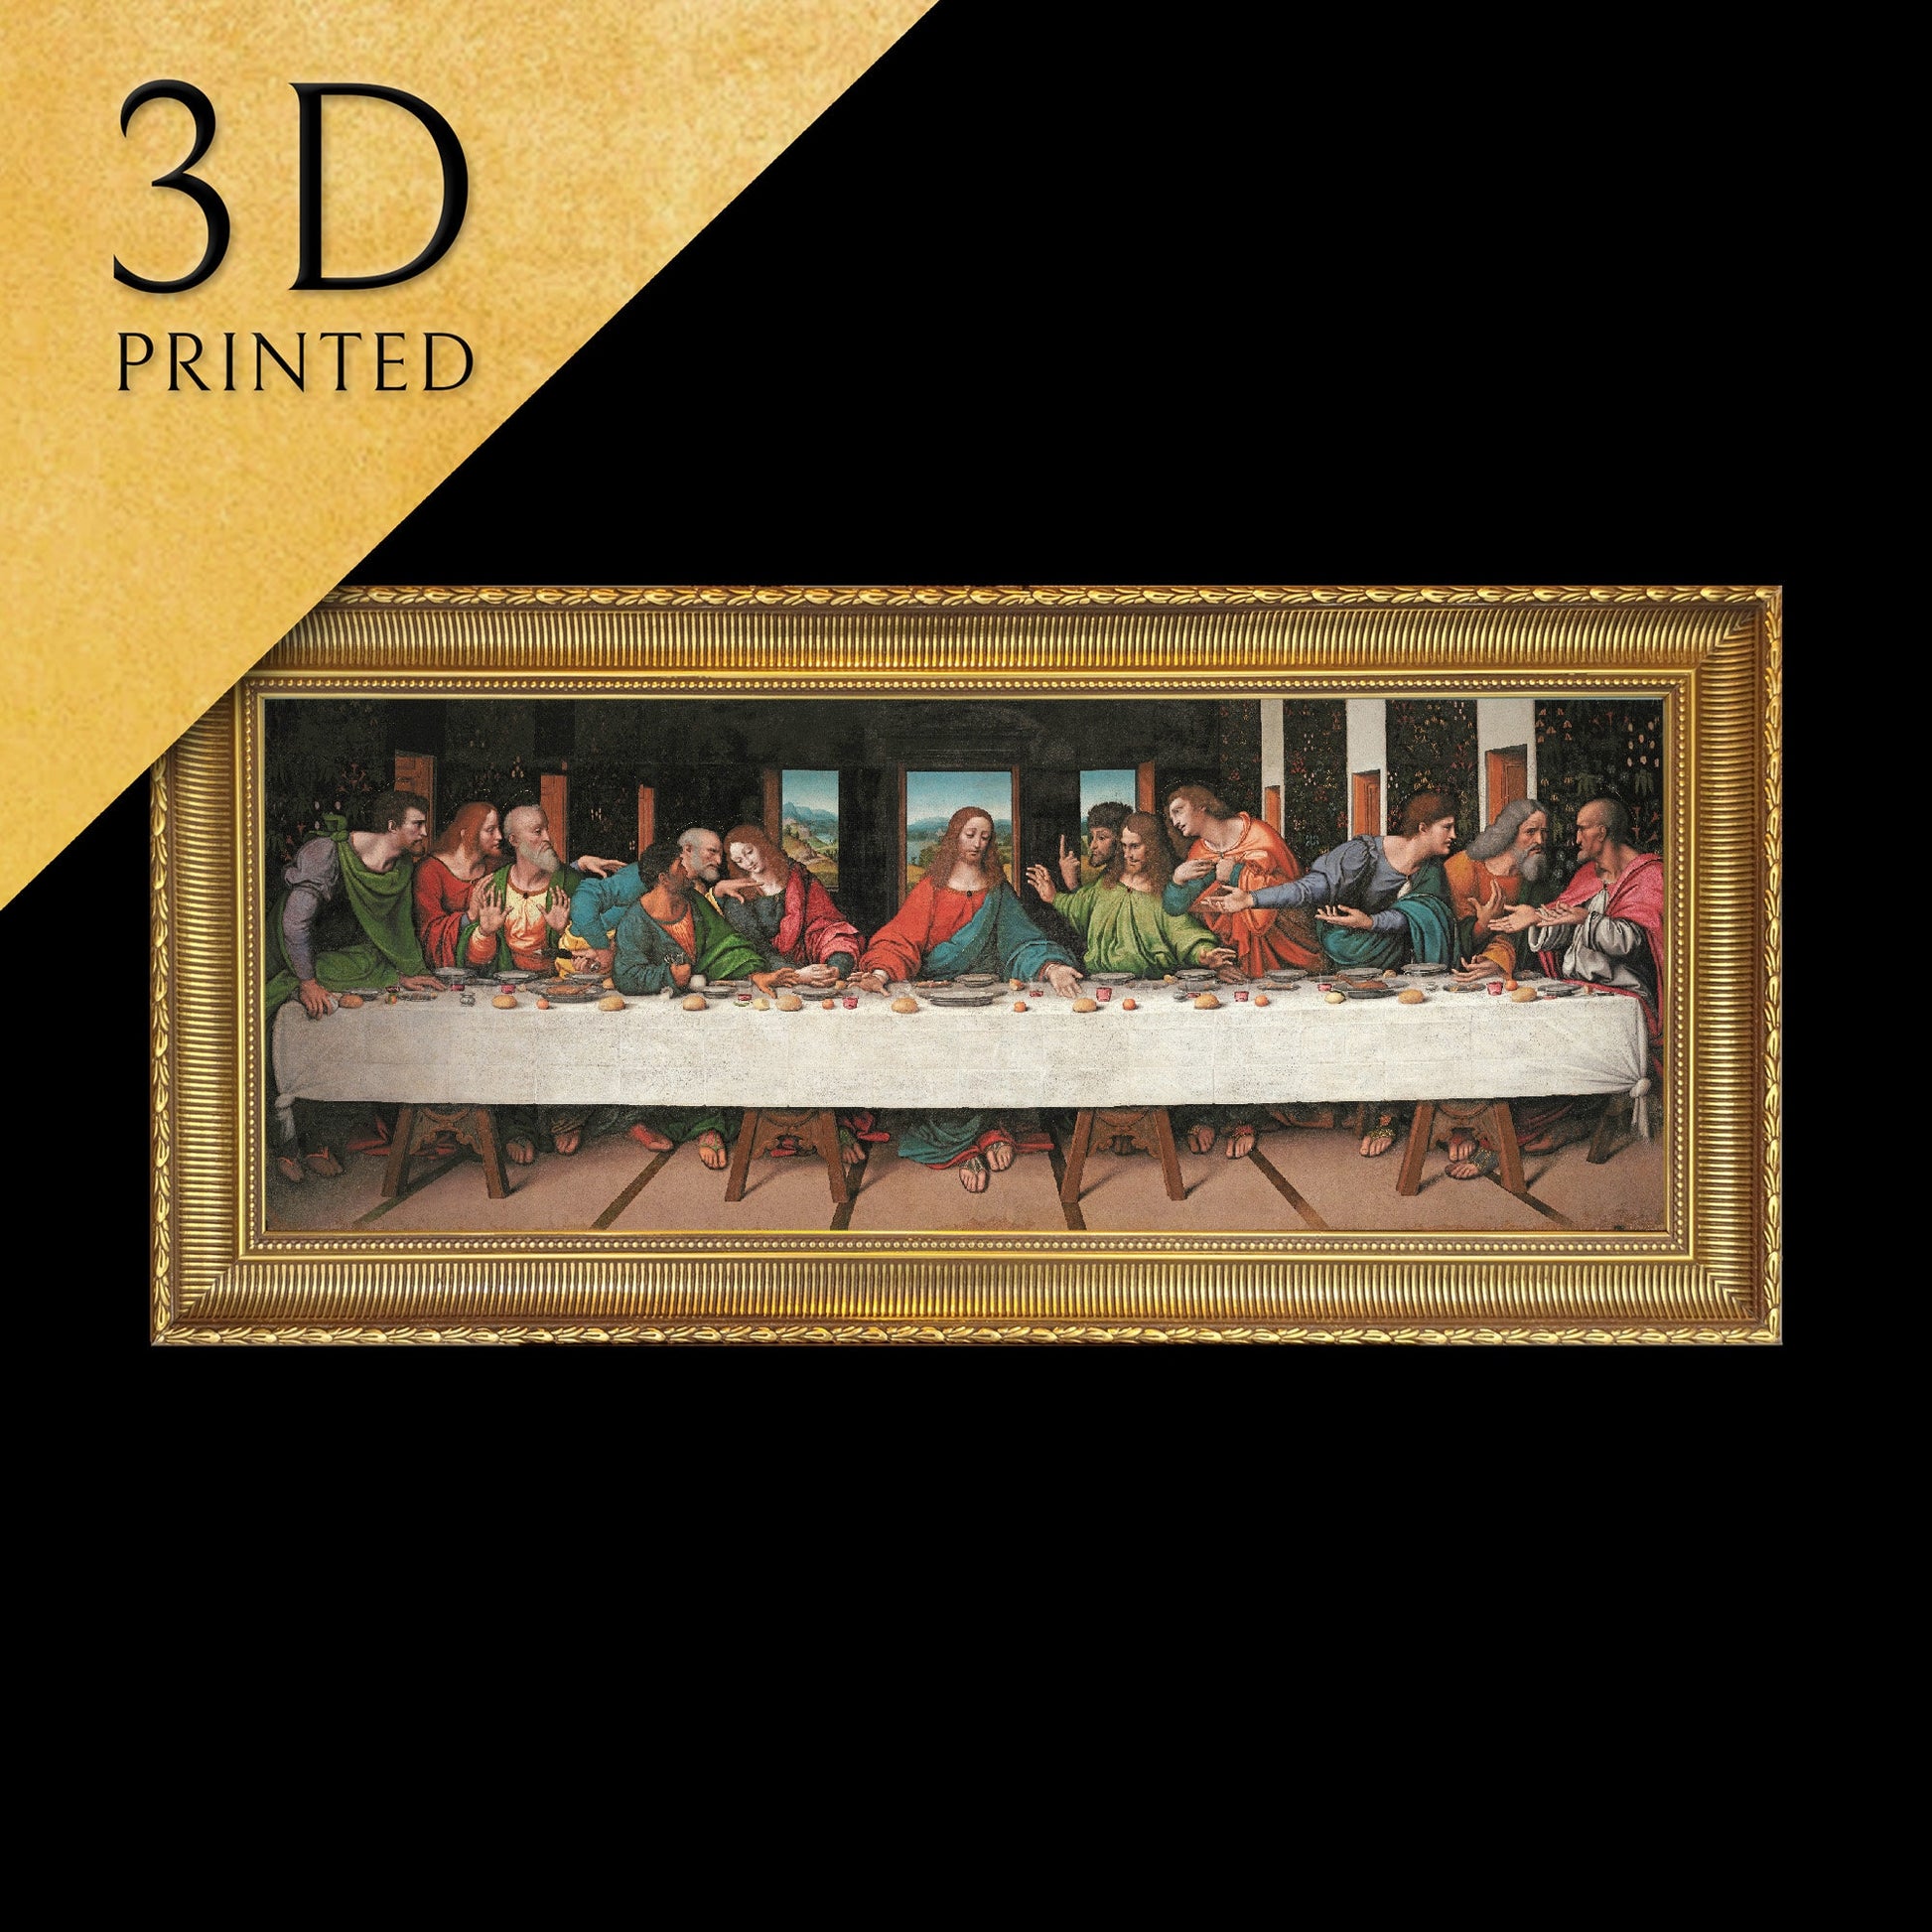 The Last Supper by Leonardo Da Vinci, 3d Printed with texture and brush strokes looks like original oil-painting, code:016